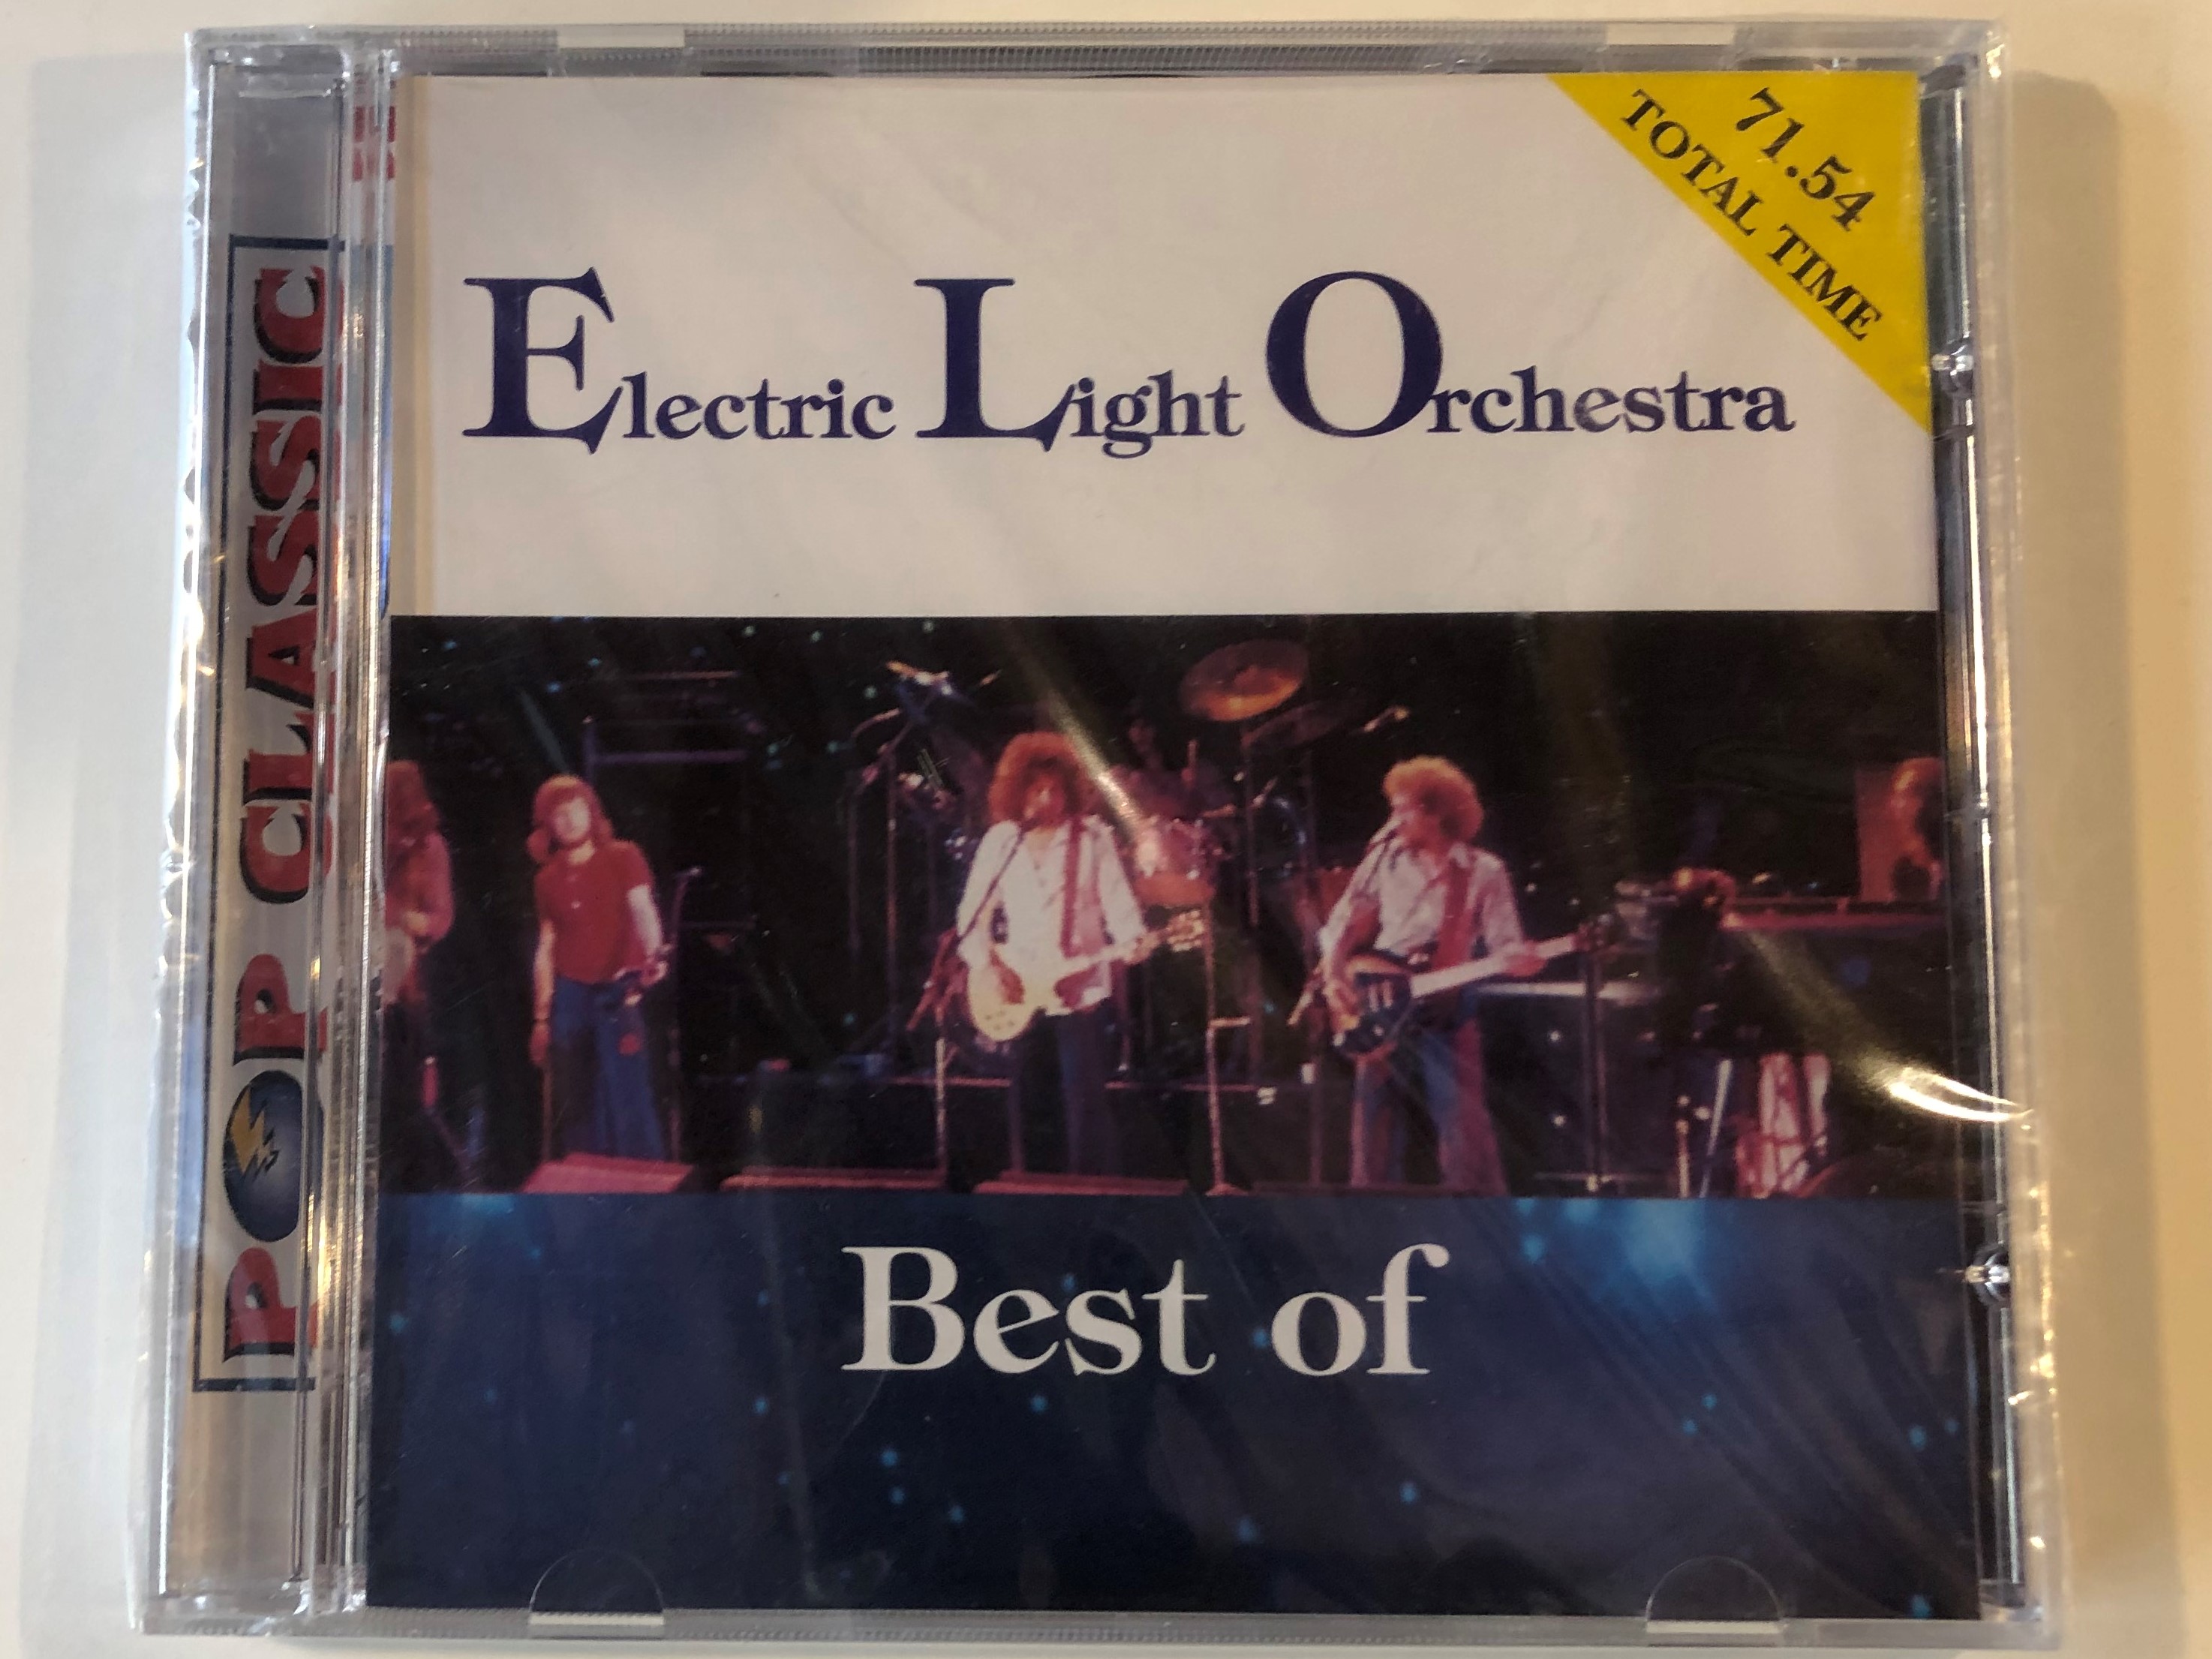 electric-light-orchestra-best-of-total-time-7154-pop-classic-audio-cd-5998490700805-1-.jpg